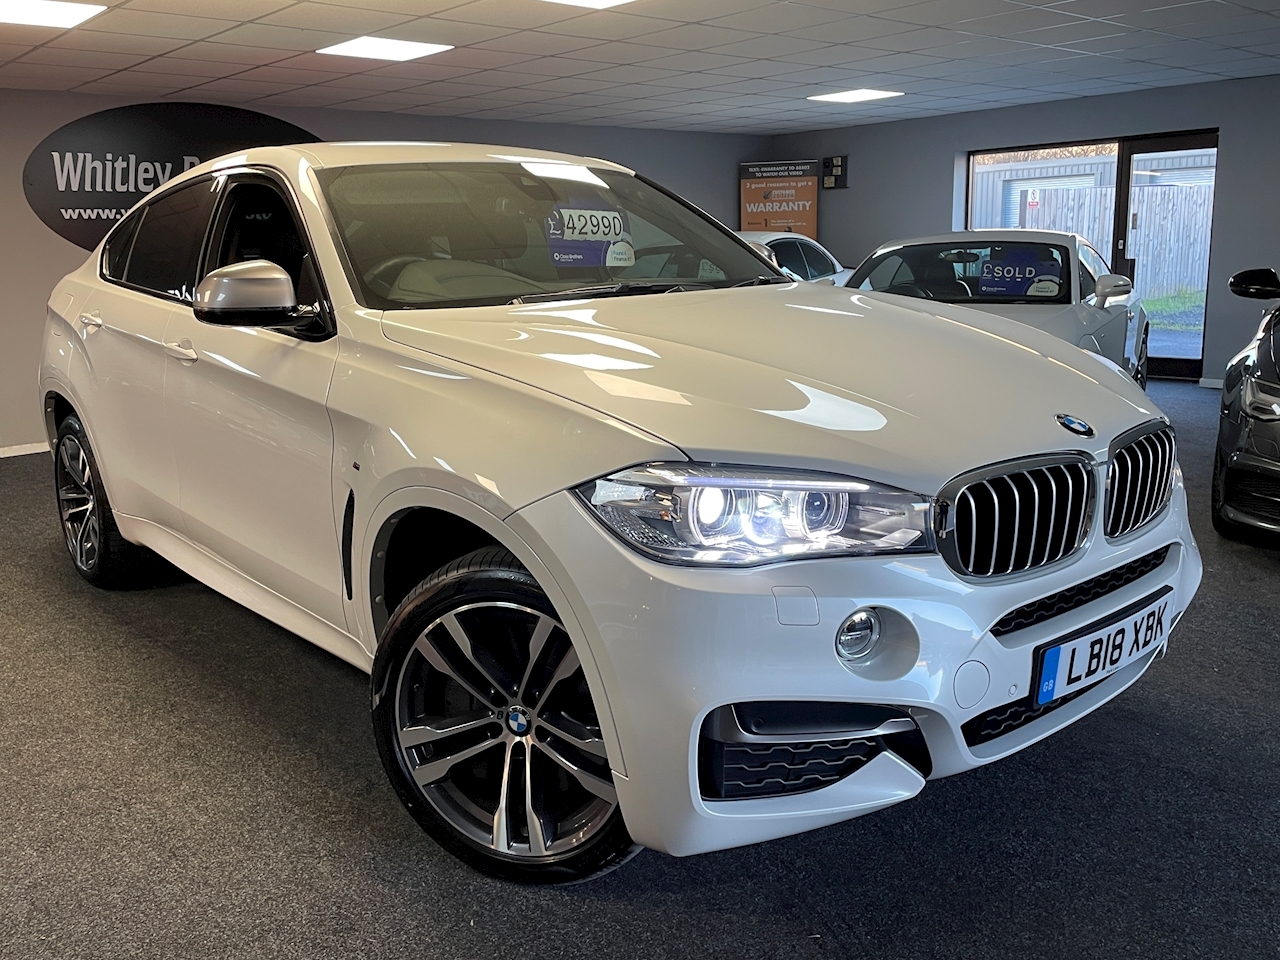 3.0 M50d SUV 5dr Diesel Auto xDrive (s/s) (381 ps)